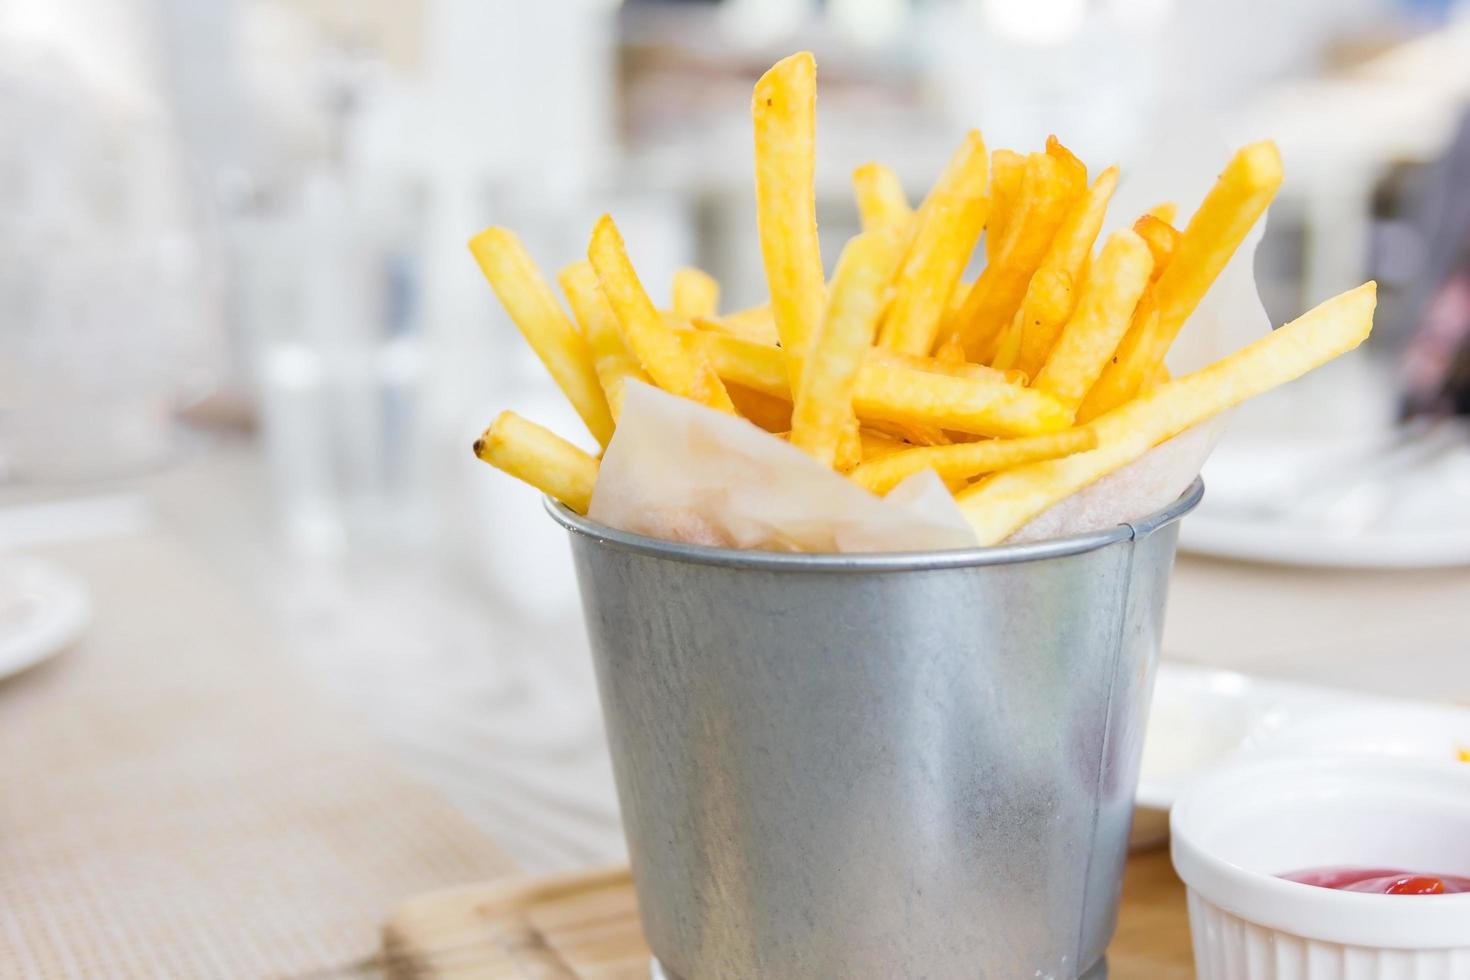 French Fries, Wrapped with a paper in a Stainless small bucket on a wooden table, Selective focus photo